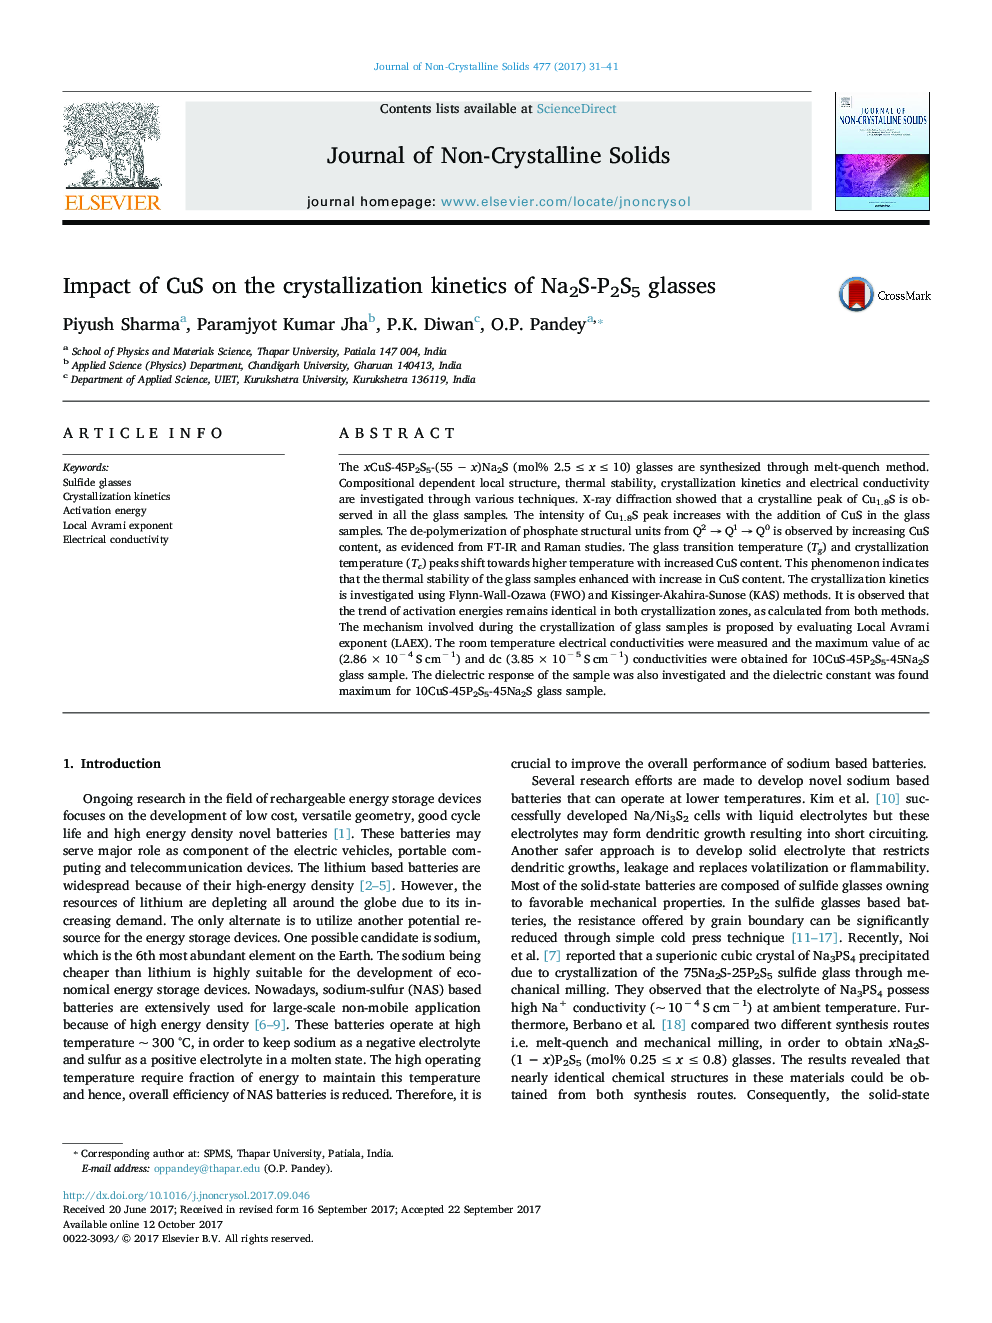 Impact of CuS on the crystallization kinetics of Na2S-P2S5 glasses